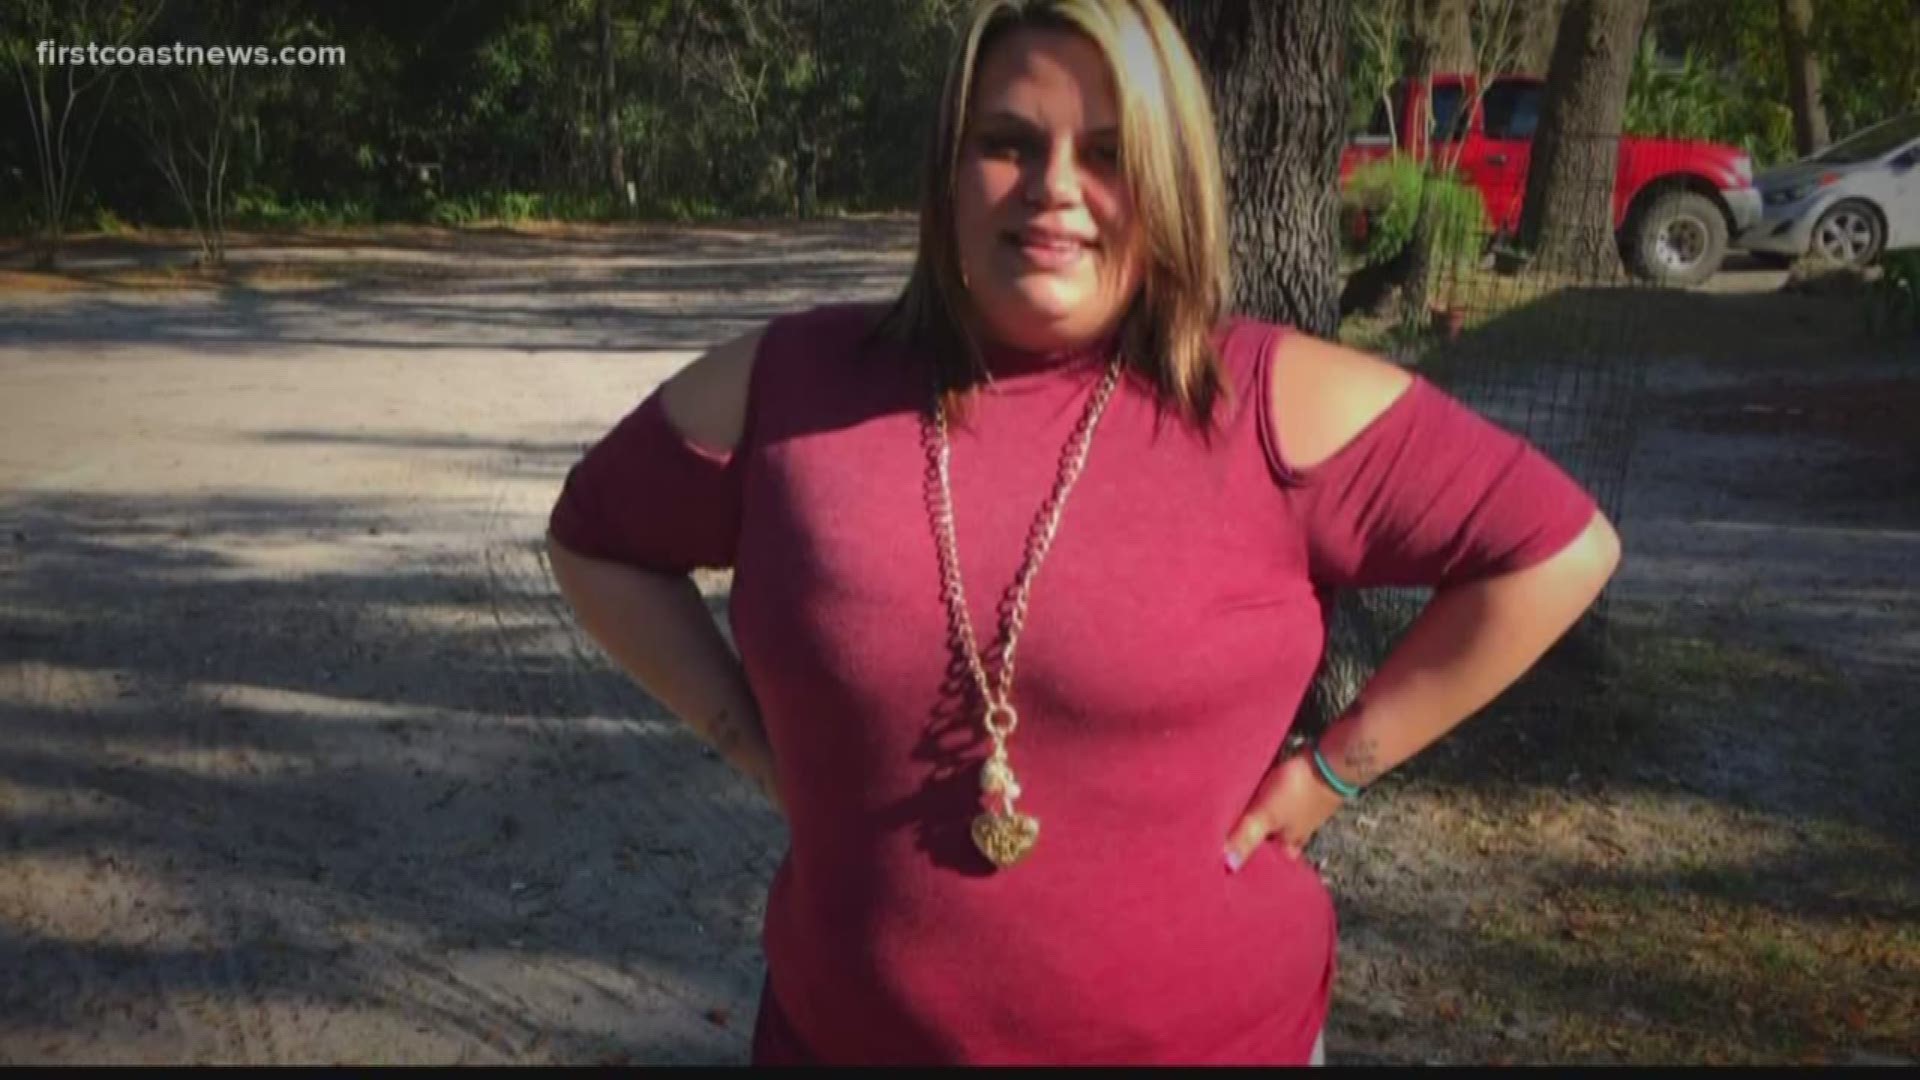 There were multiple people that saw the murder of Christin Cassels. Yet, in her small town, few are talking, but her family isn't giving up hope for answers.